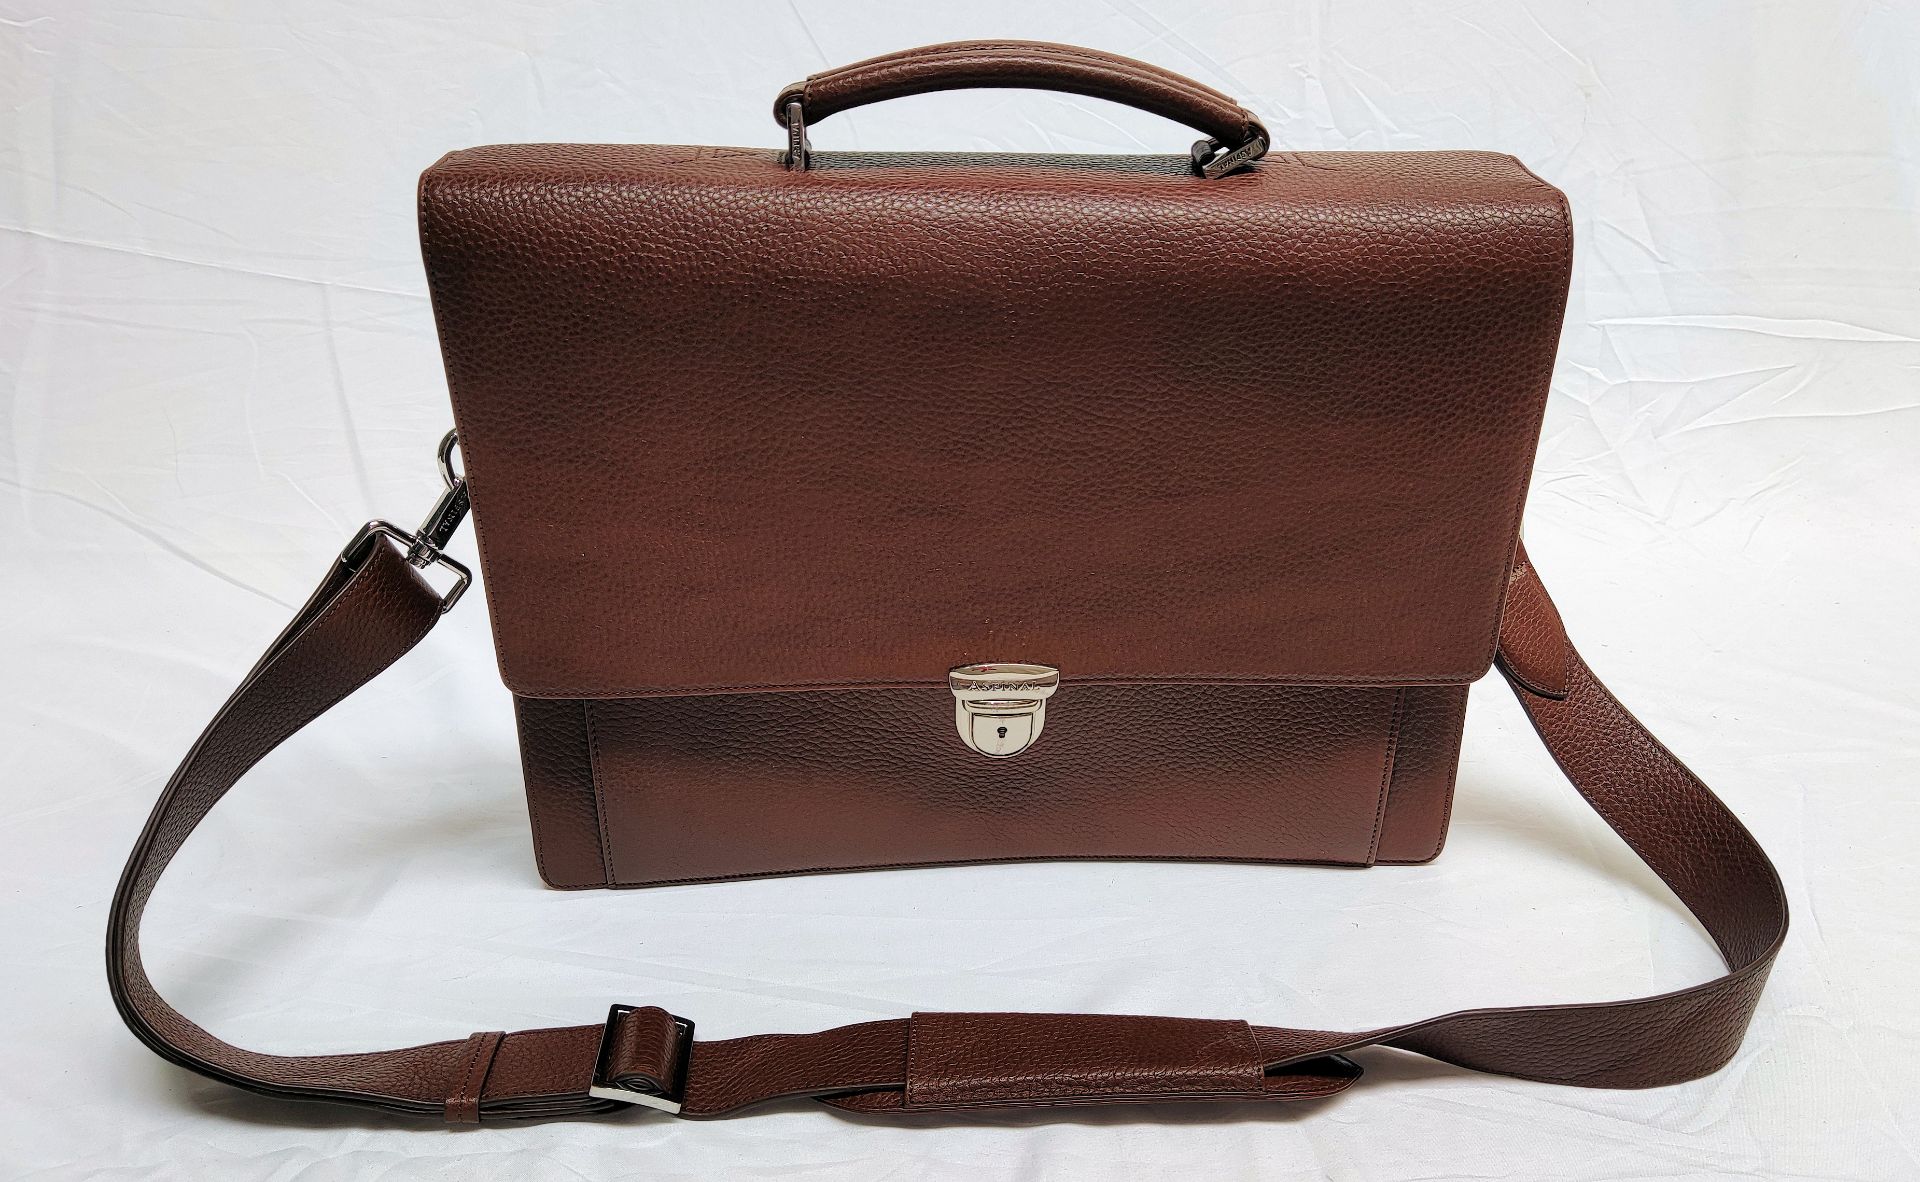 1 x ASPINAL OF LONDON City Laptop Briefcase - Tobacco Pebble - Original RRP £595 - Ref: 7004590/ - Image 5 of 13